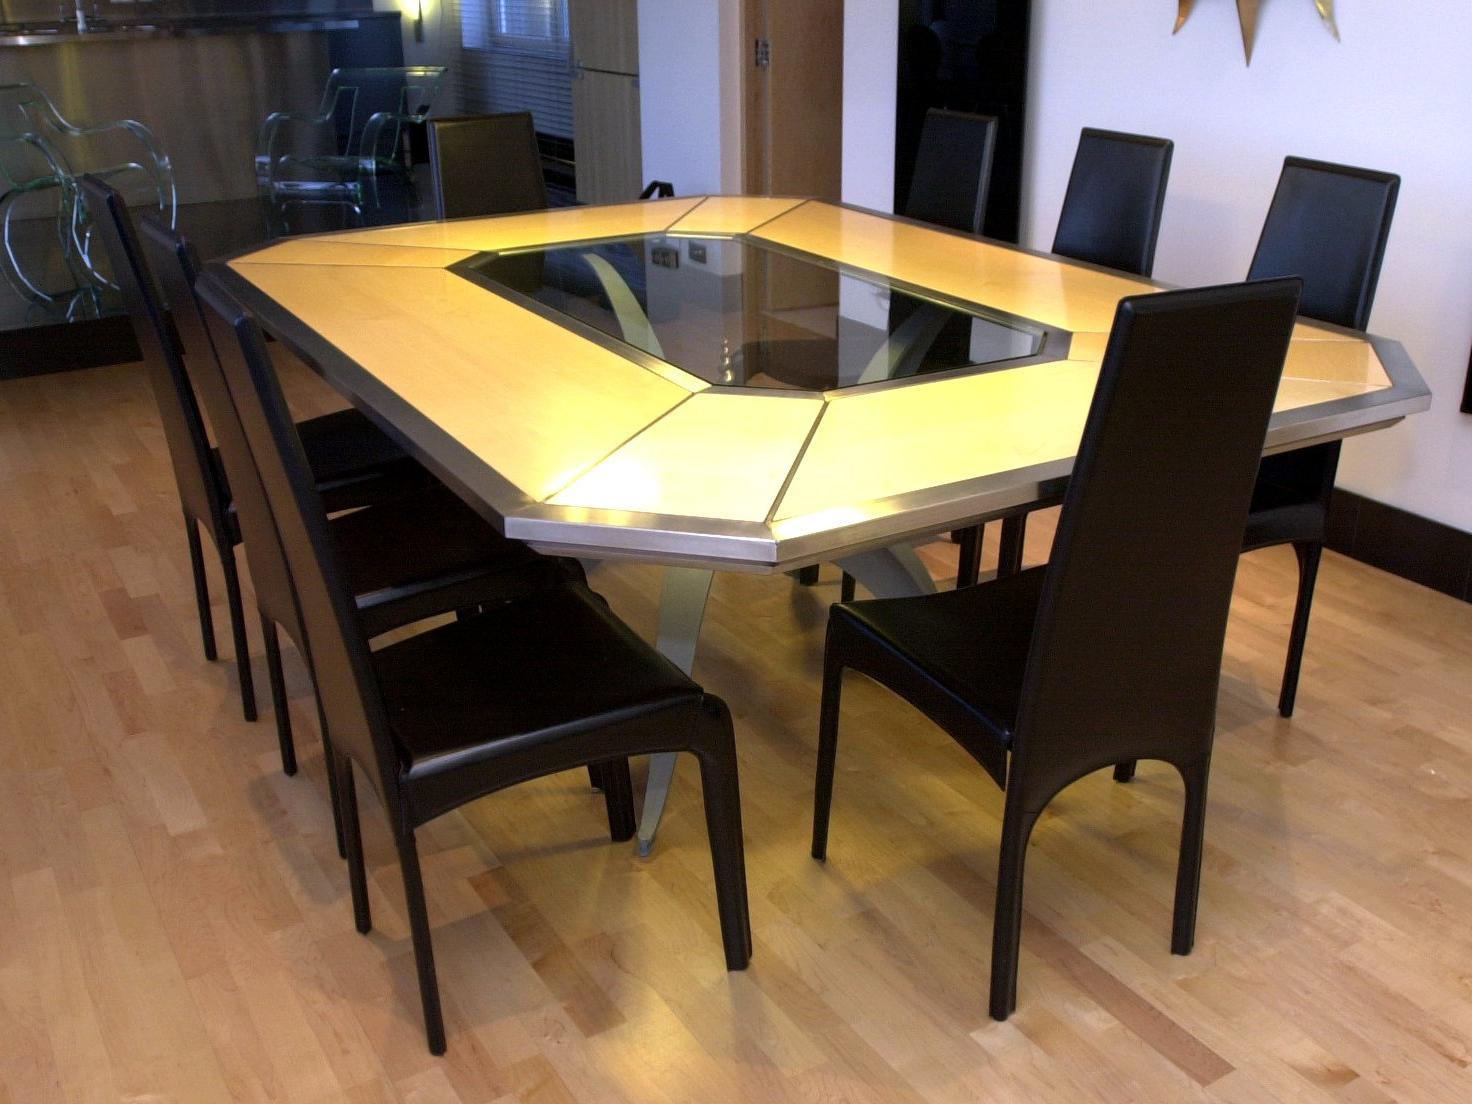 City centre living was becoming more popular in Leeds. This seven thousand pound dining table was part of the lifestyle offering at an apartment on Park Lane.